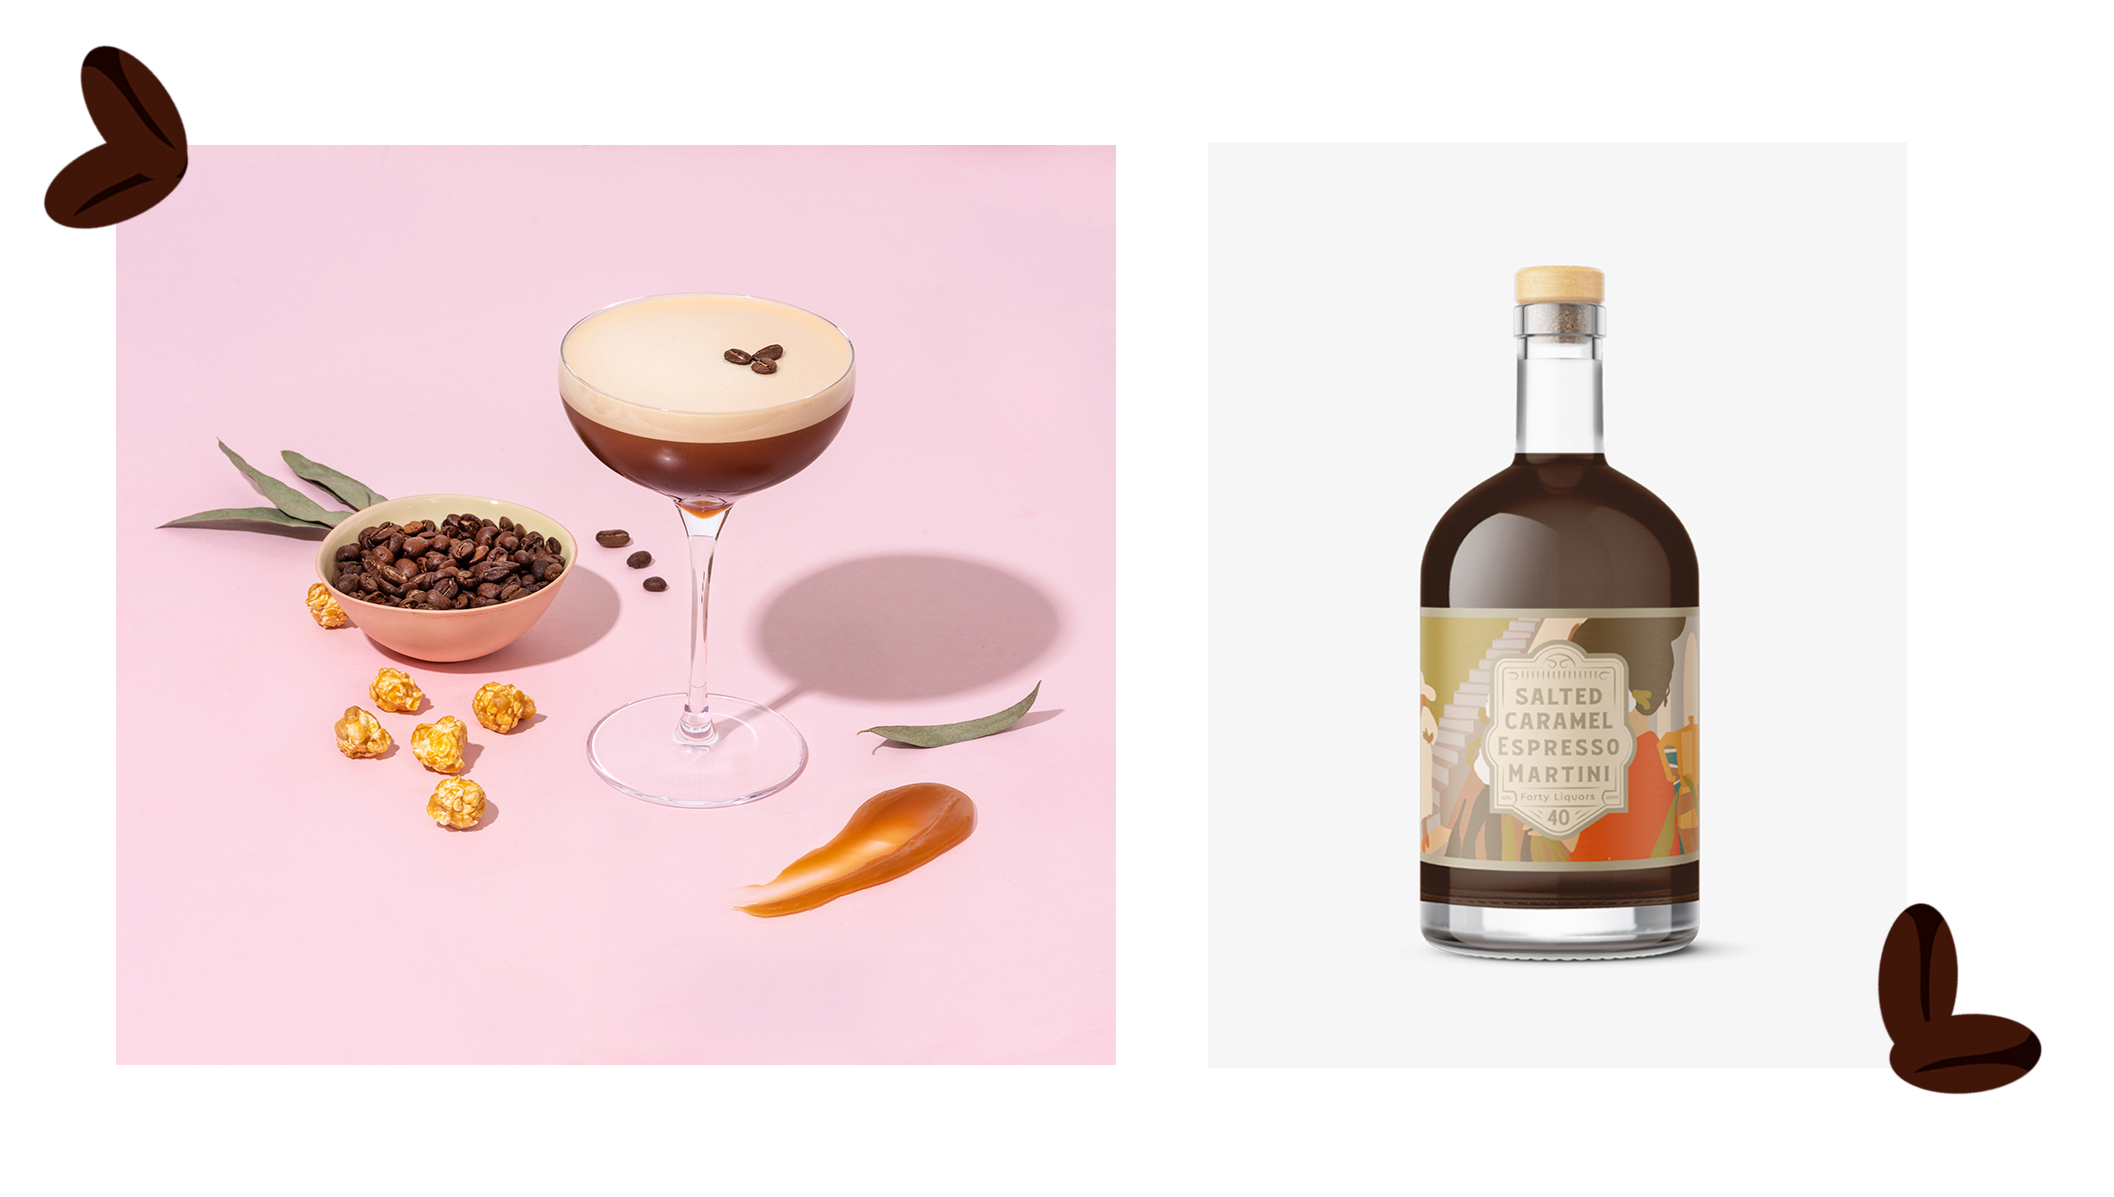 Salted Caramel Espresso Martini image with coffee beans and the cocktail bottled